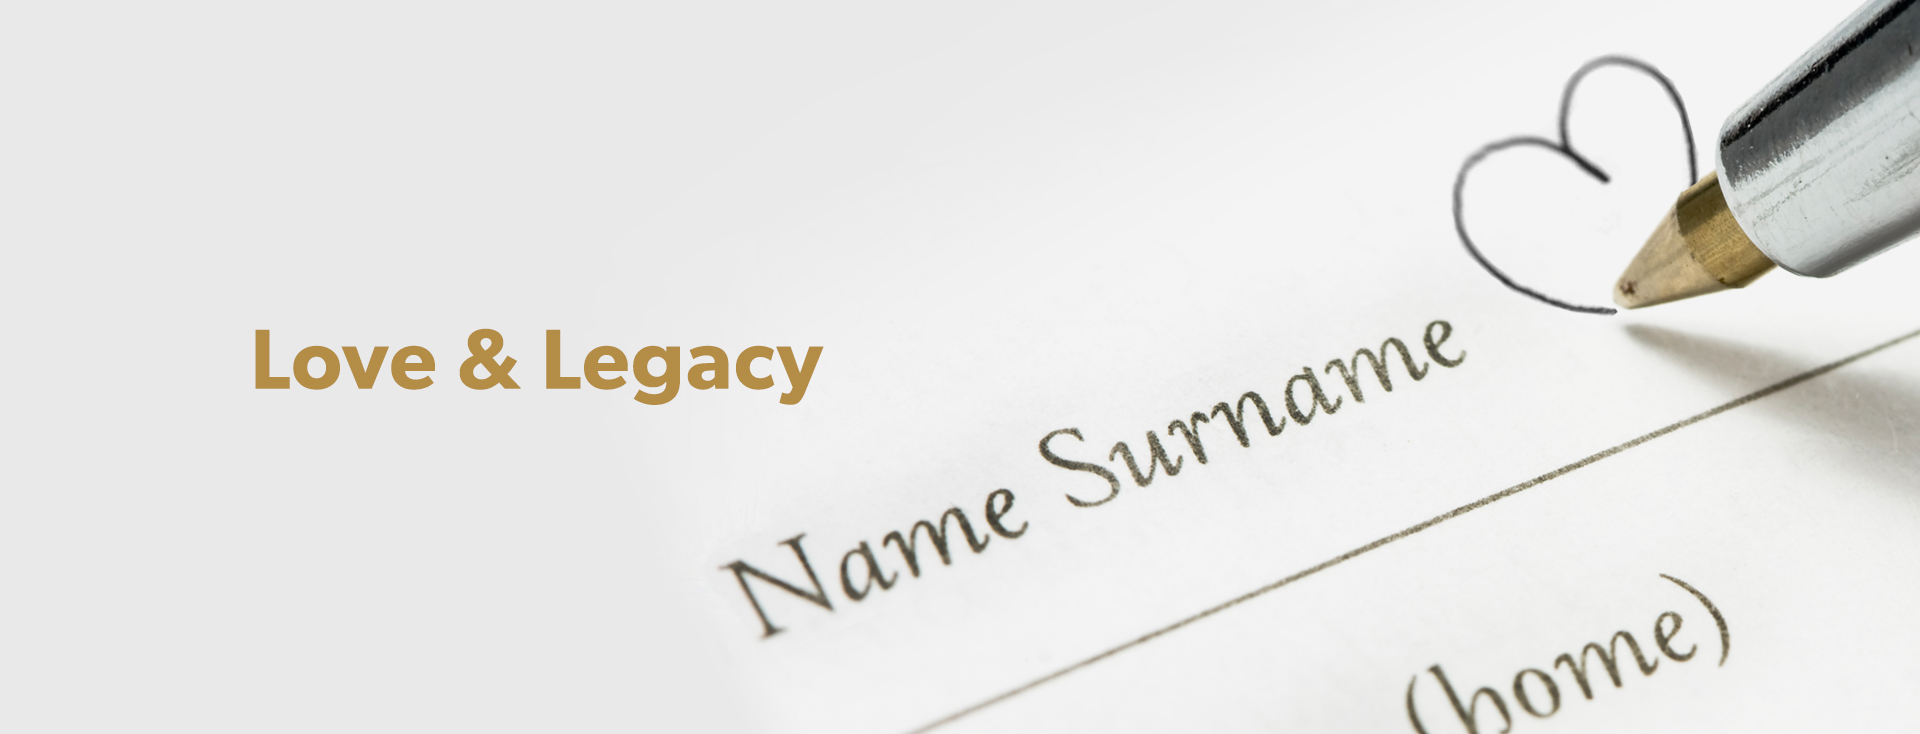 Love & Legacy: The history of the surname Love